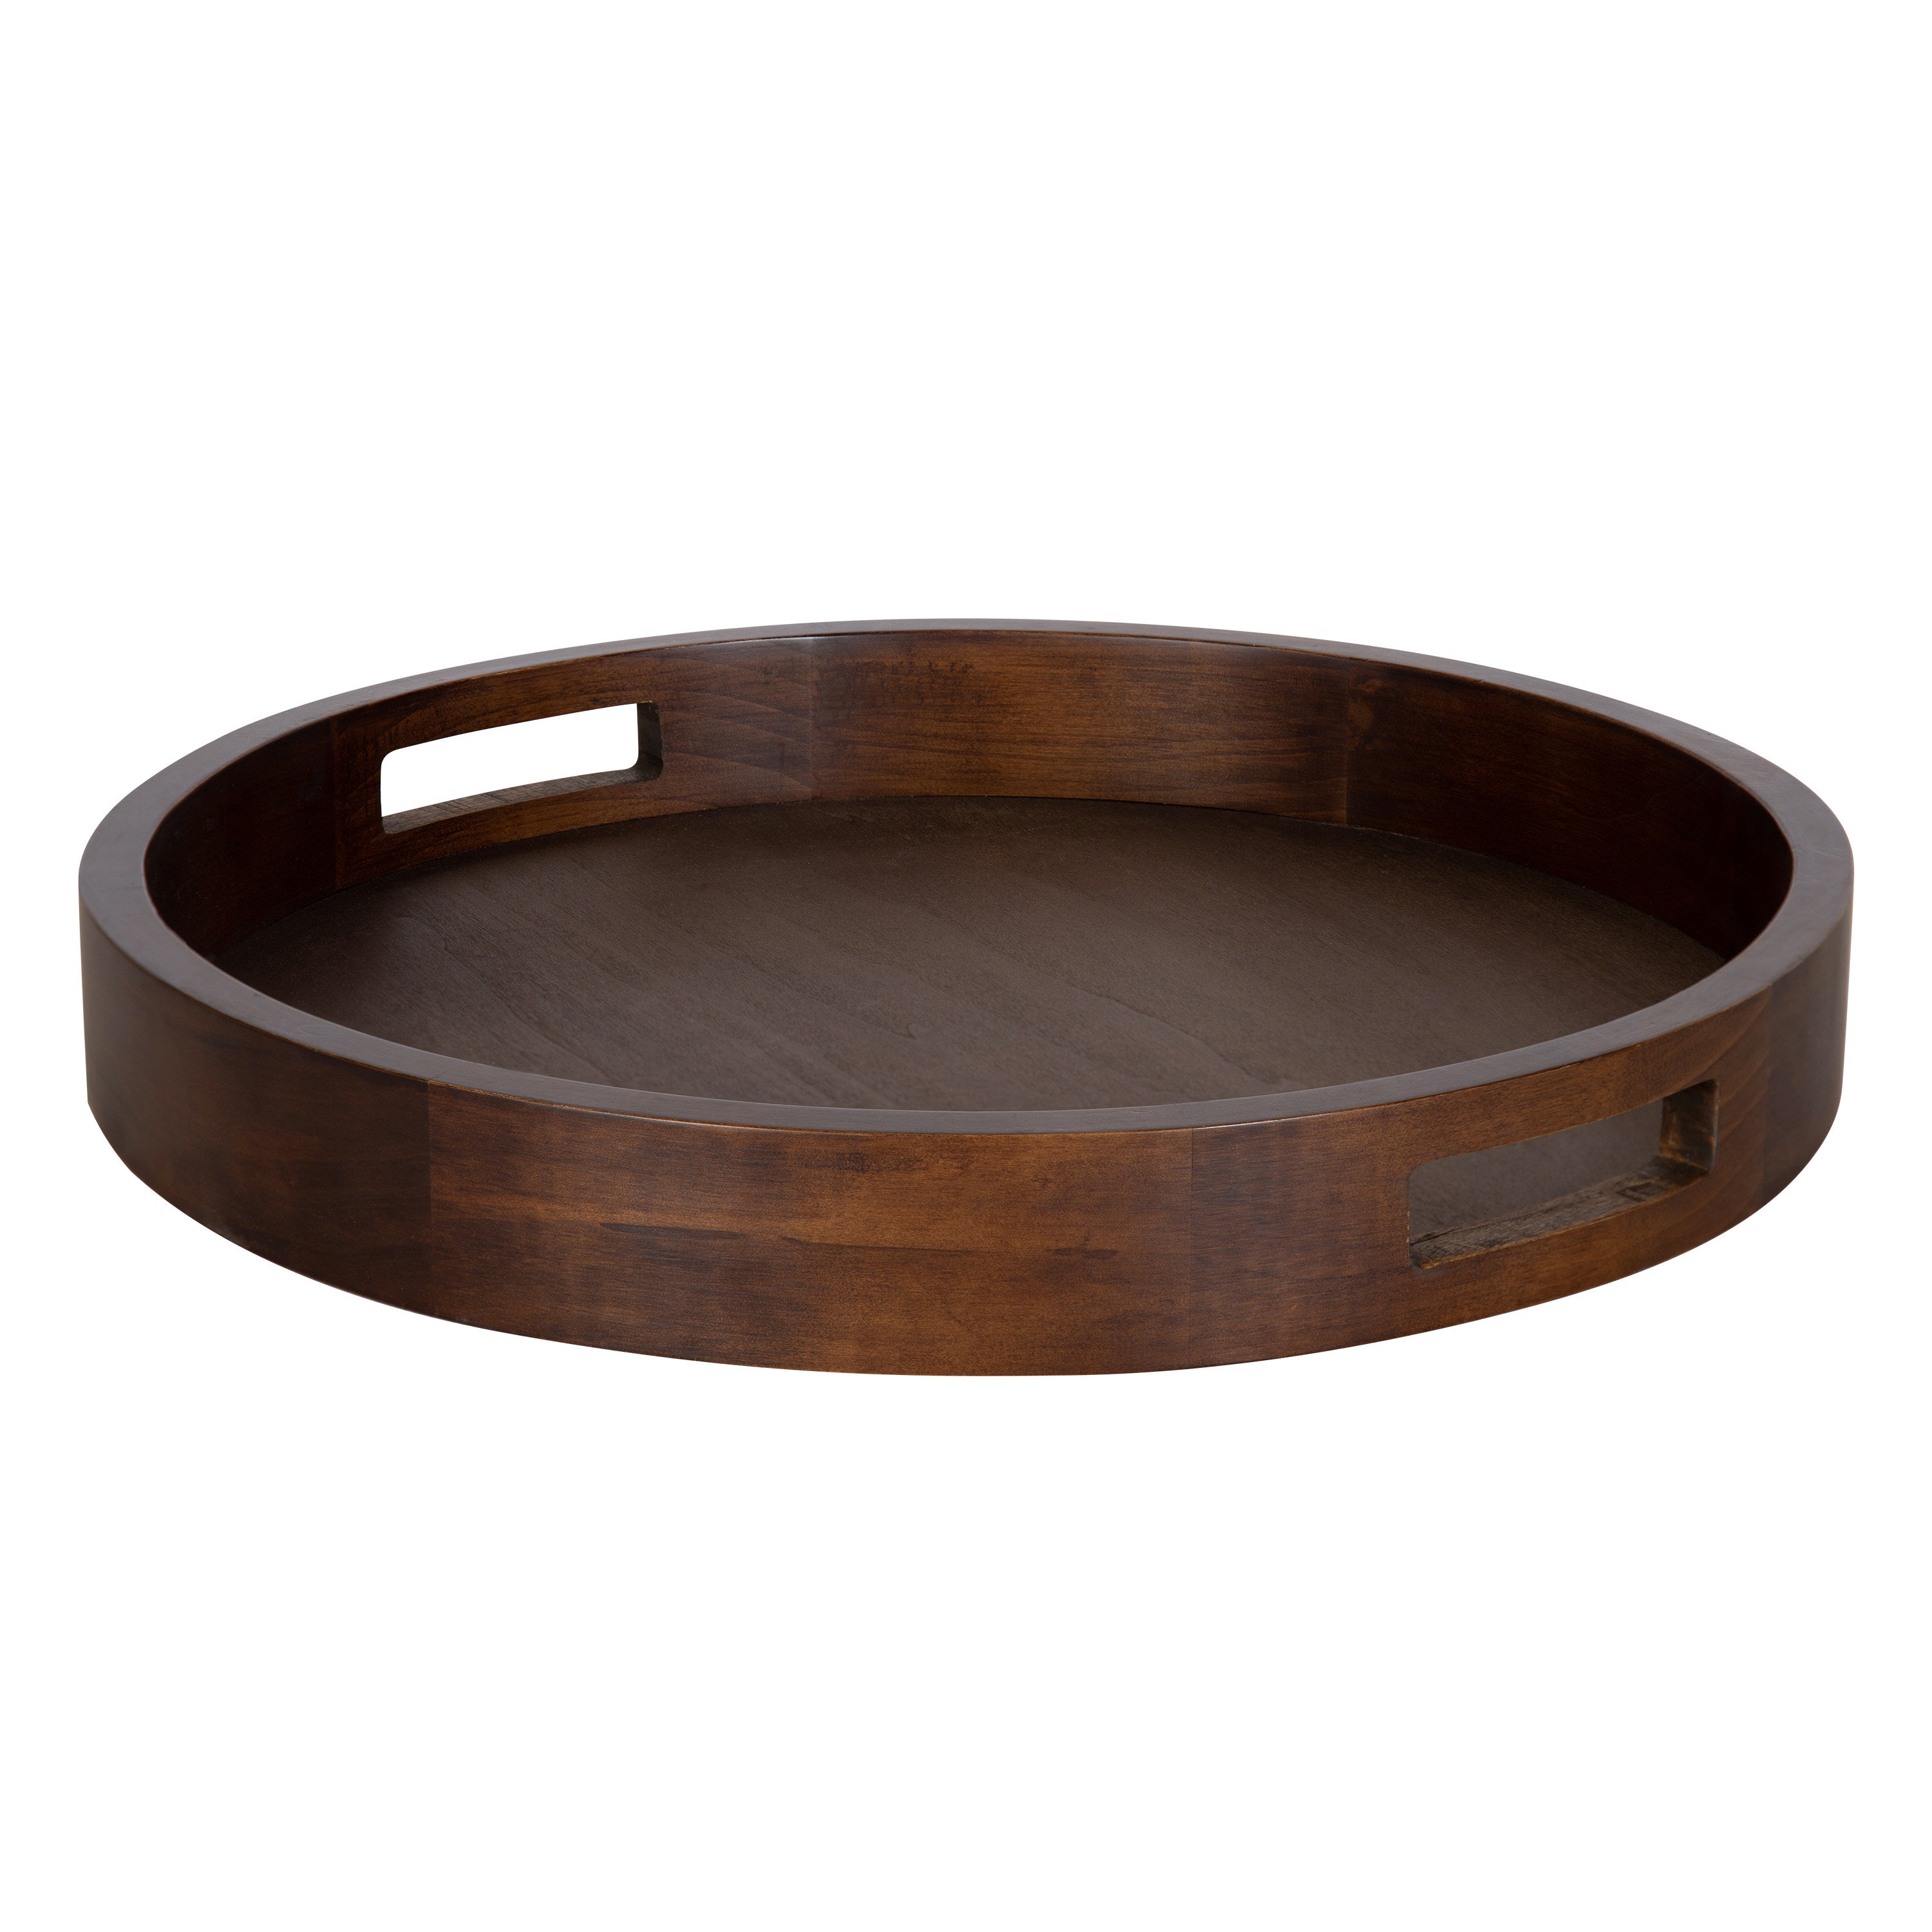 Kate and Laurel Hutton Large Round Wood Tray with Handles, Walnut Brown  Finish – kateandlaurel